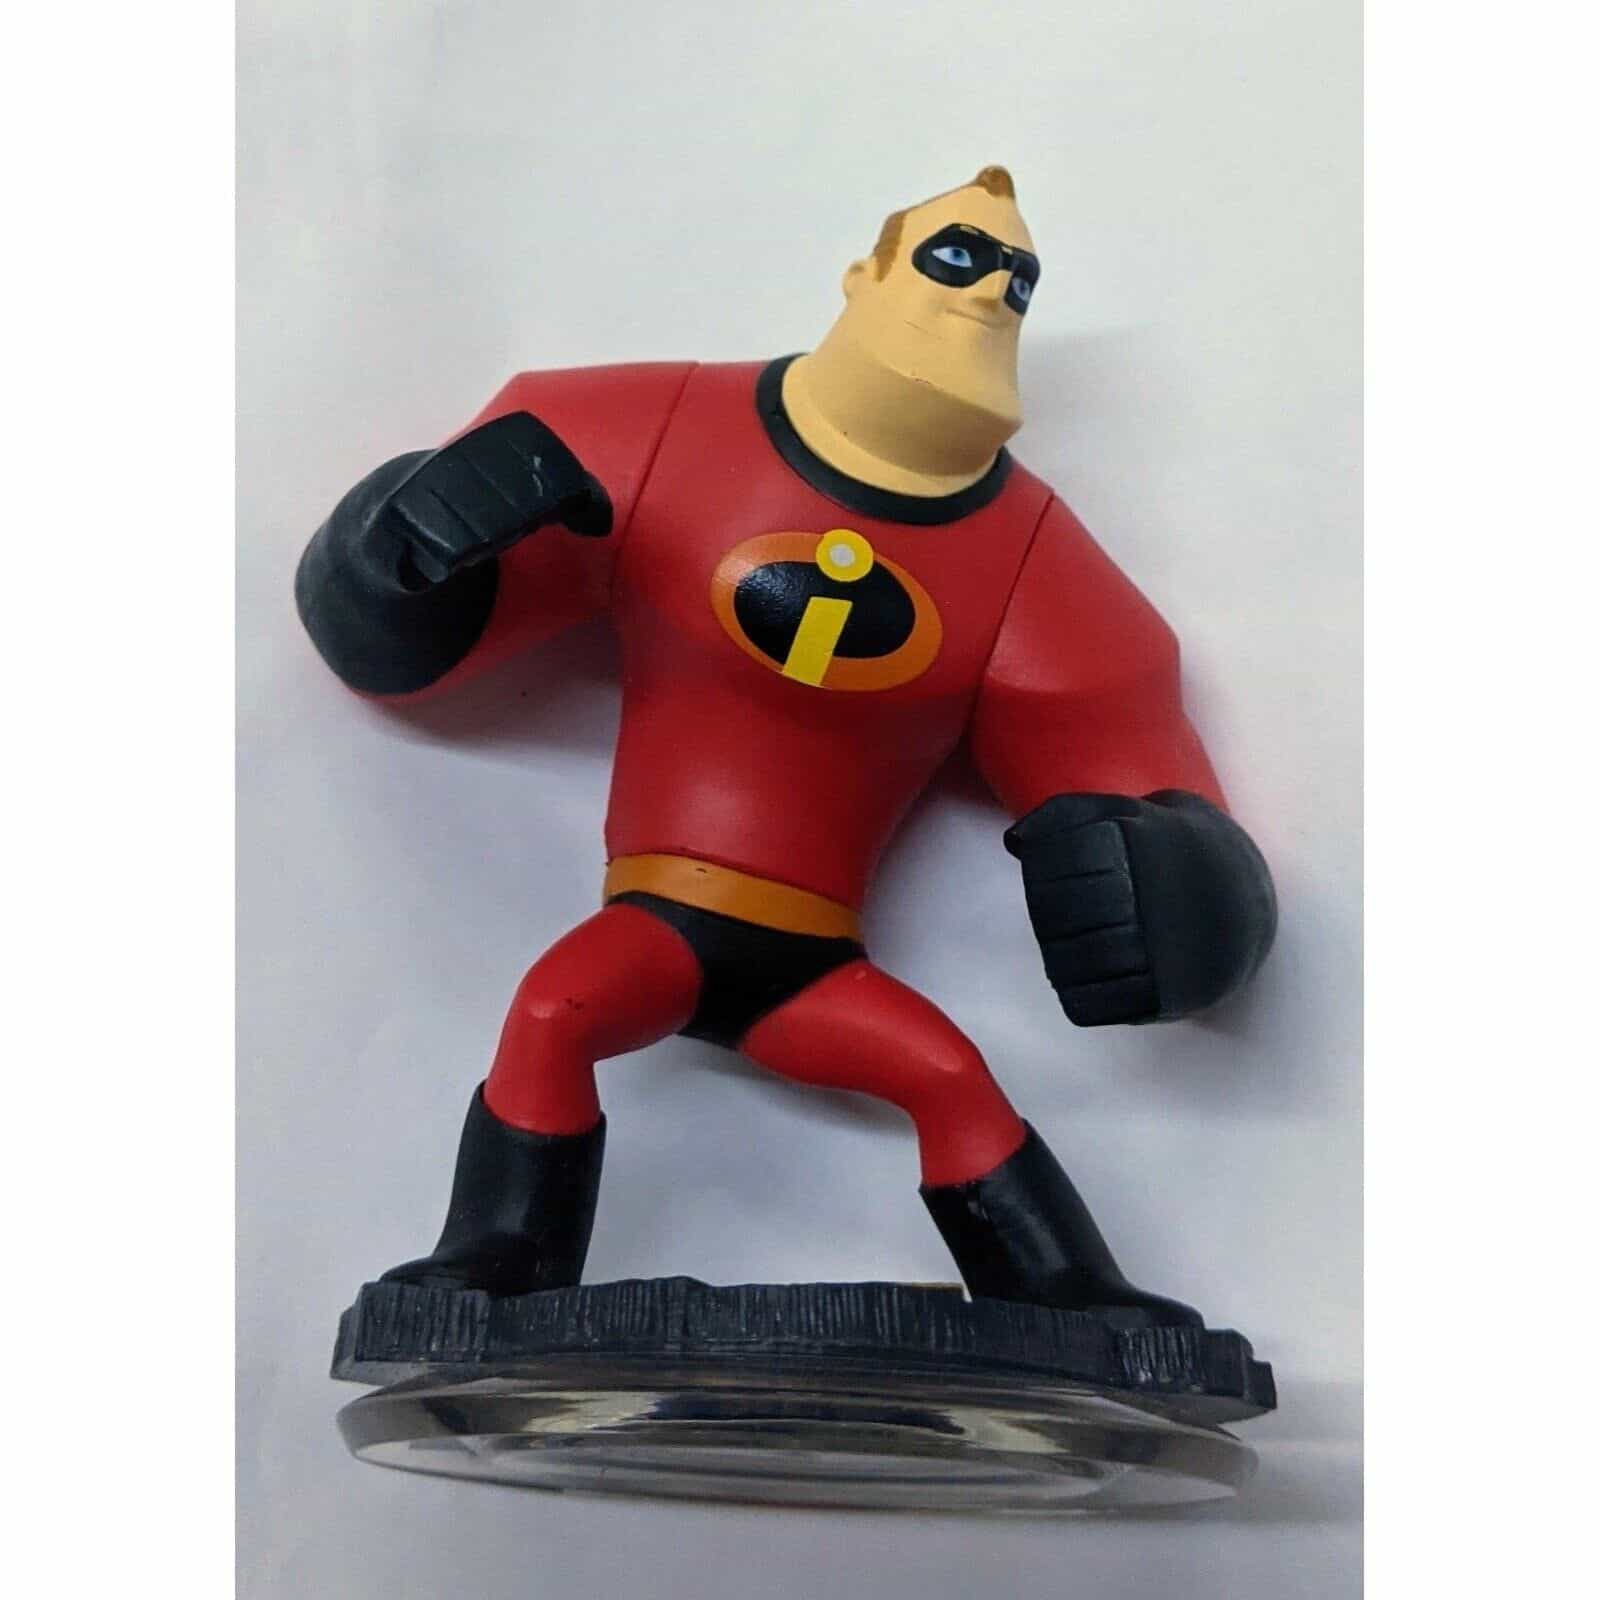 Mr. Incredible Disney Infinity Character for Nintendo Wii Game